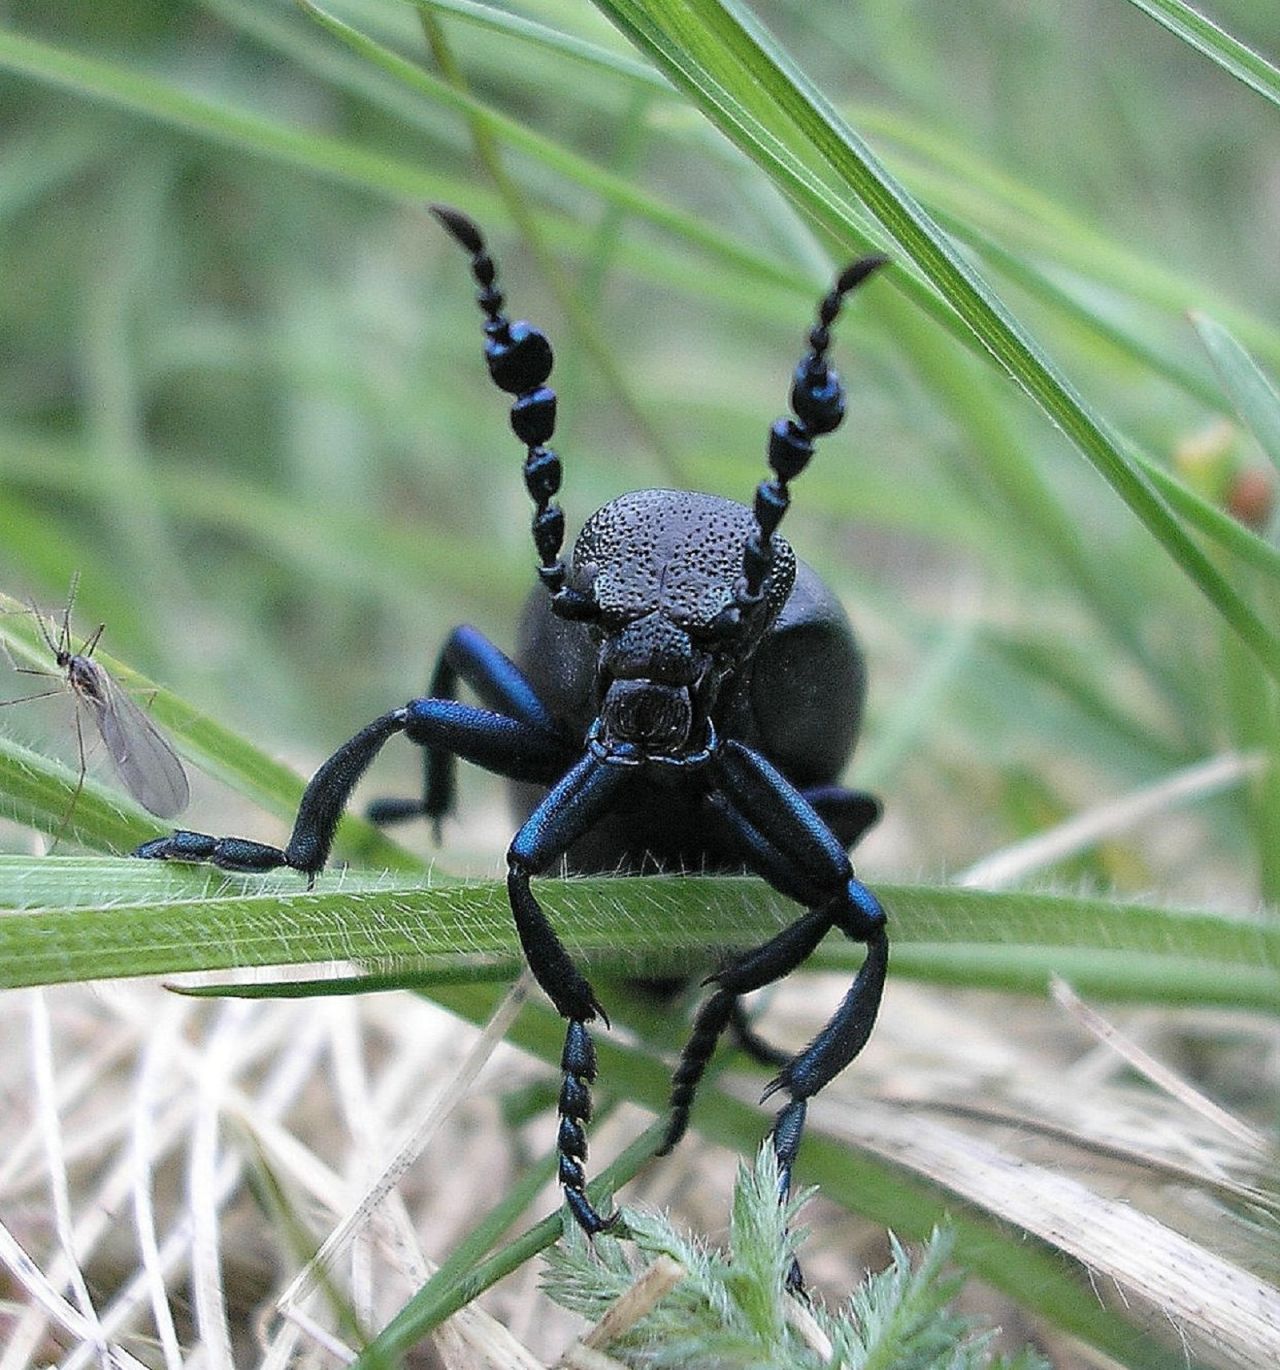 Wildflower-rich grasslands and heathlands are important for maintaining connectivity and biodiversity. Other species depend on pollinators for survival, for instance The black oil beetle thrives in those areas and is largely dependent on the <a href="https://cdn.buglife.org.uk/2019/08/Oil-Beetle-national-survey-leaflet-for-web_5-species.pdf" target="_blank" target="_blank">diversity of wild bees</a>.